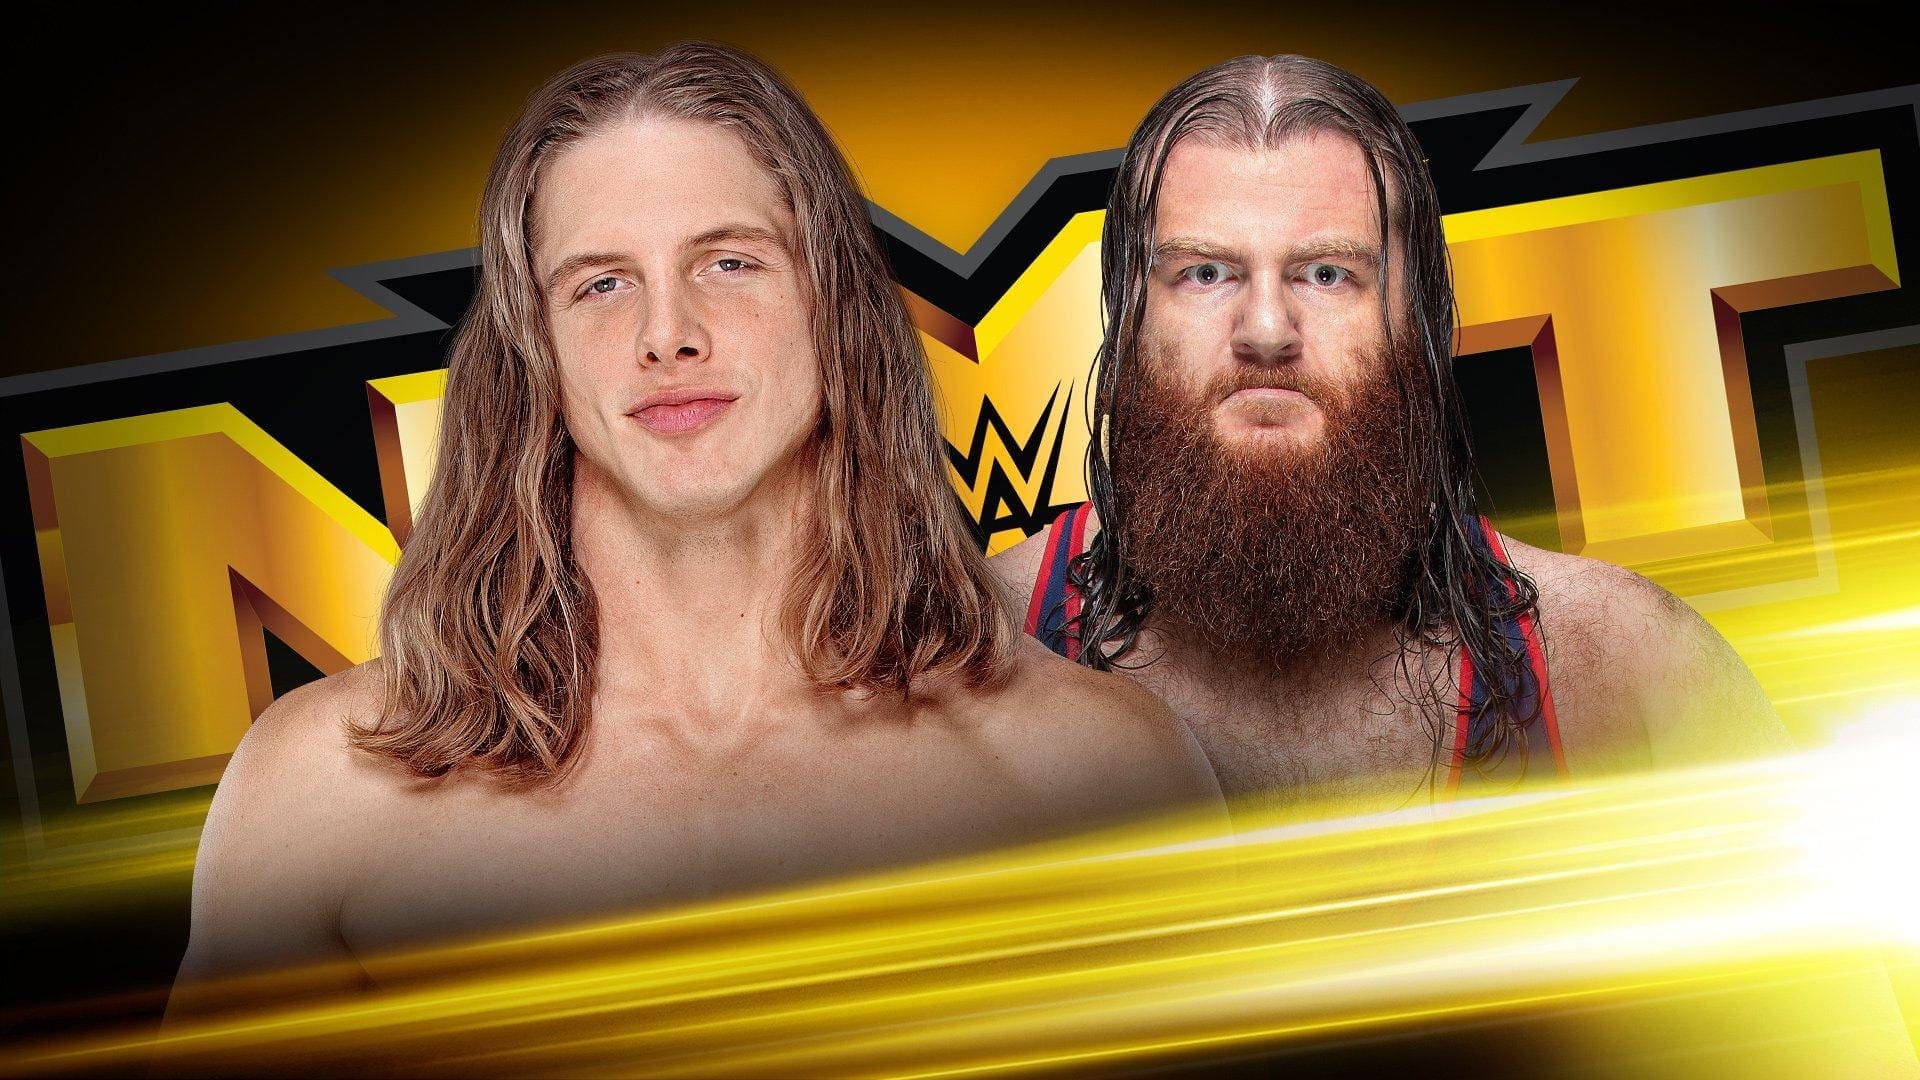 Confirmed Matches & Return Set for Tonight’s Episode of NXT